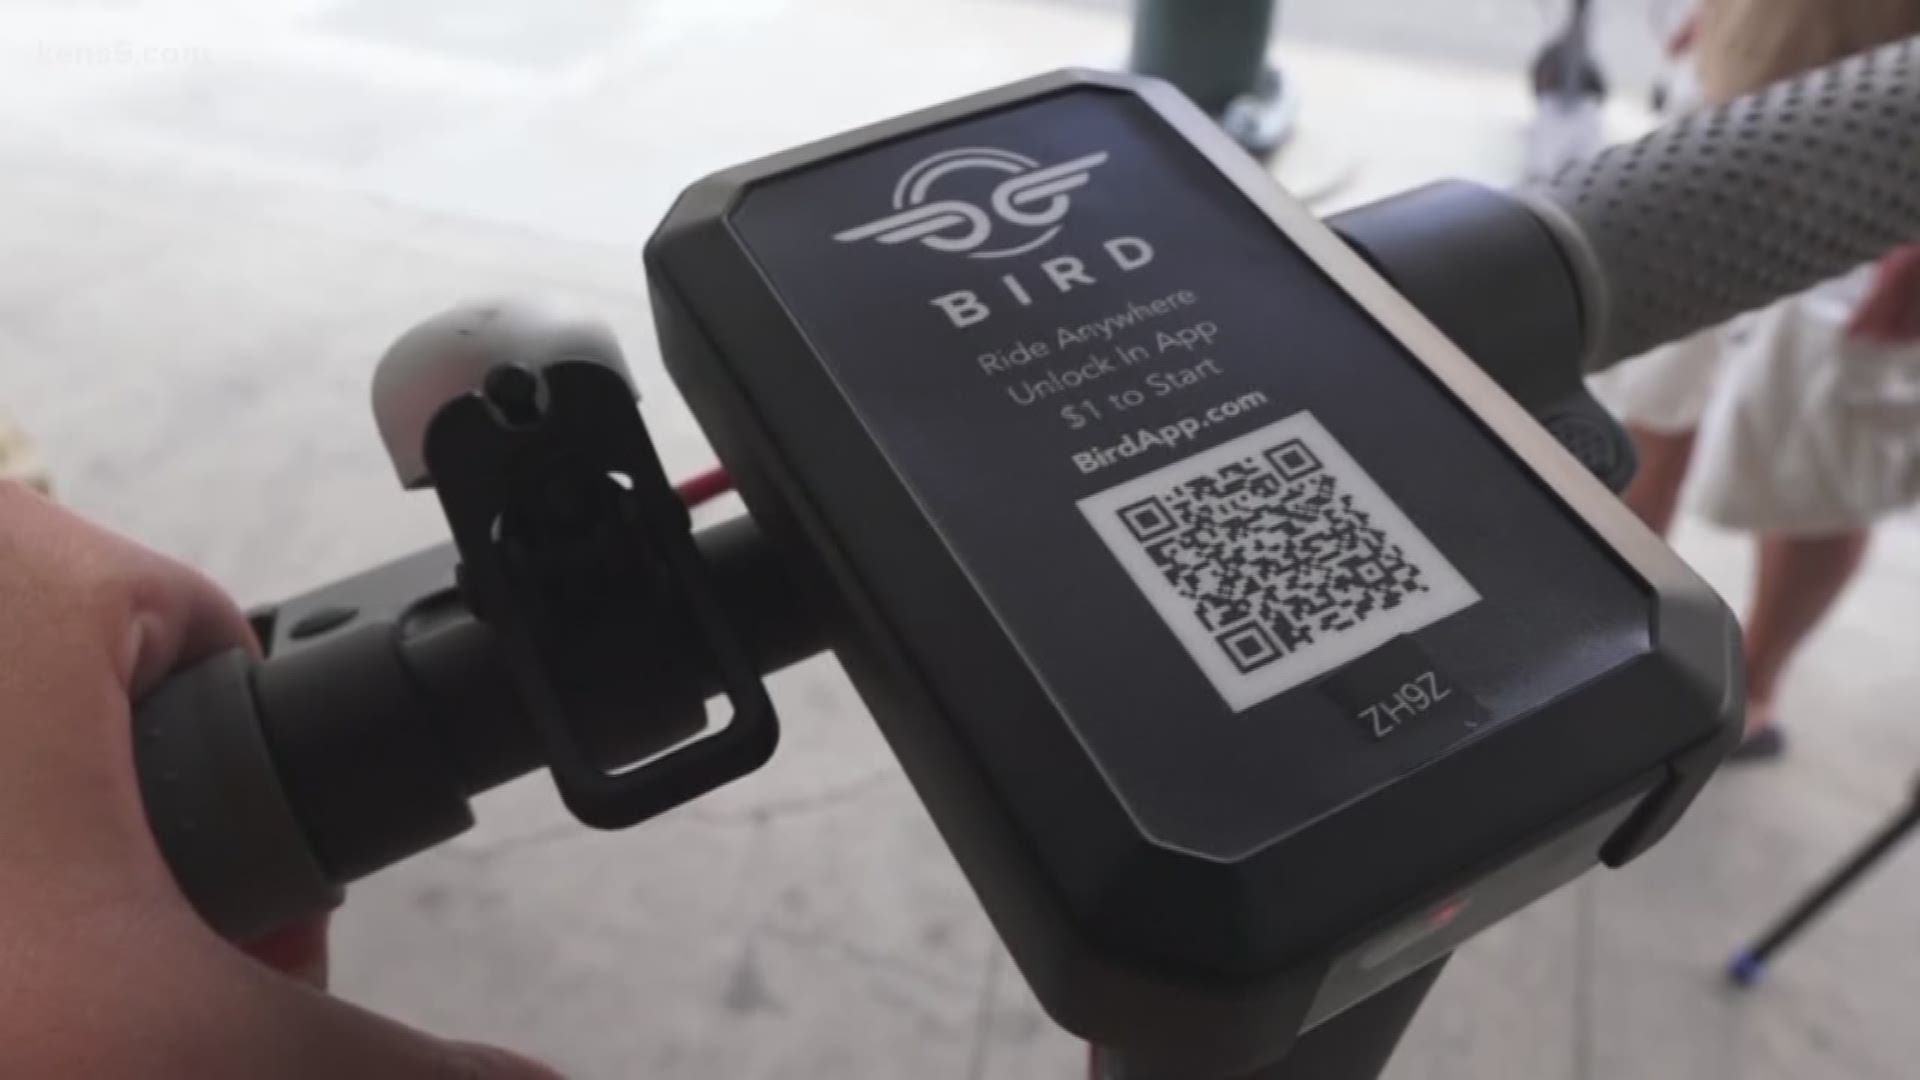 On Friday, Bird lauched its dockless, electric scooters in San Antonio. The scooters can be found across town and can only be unlocked through the app.